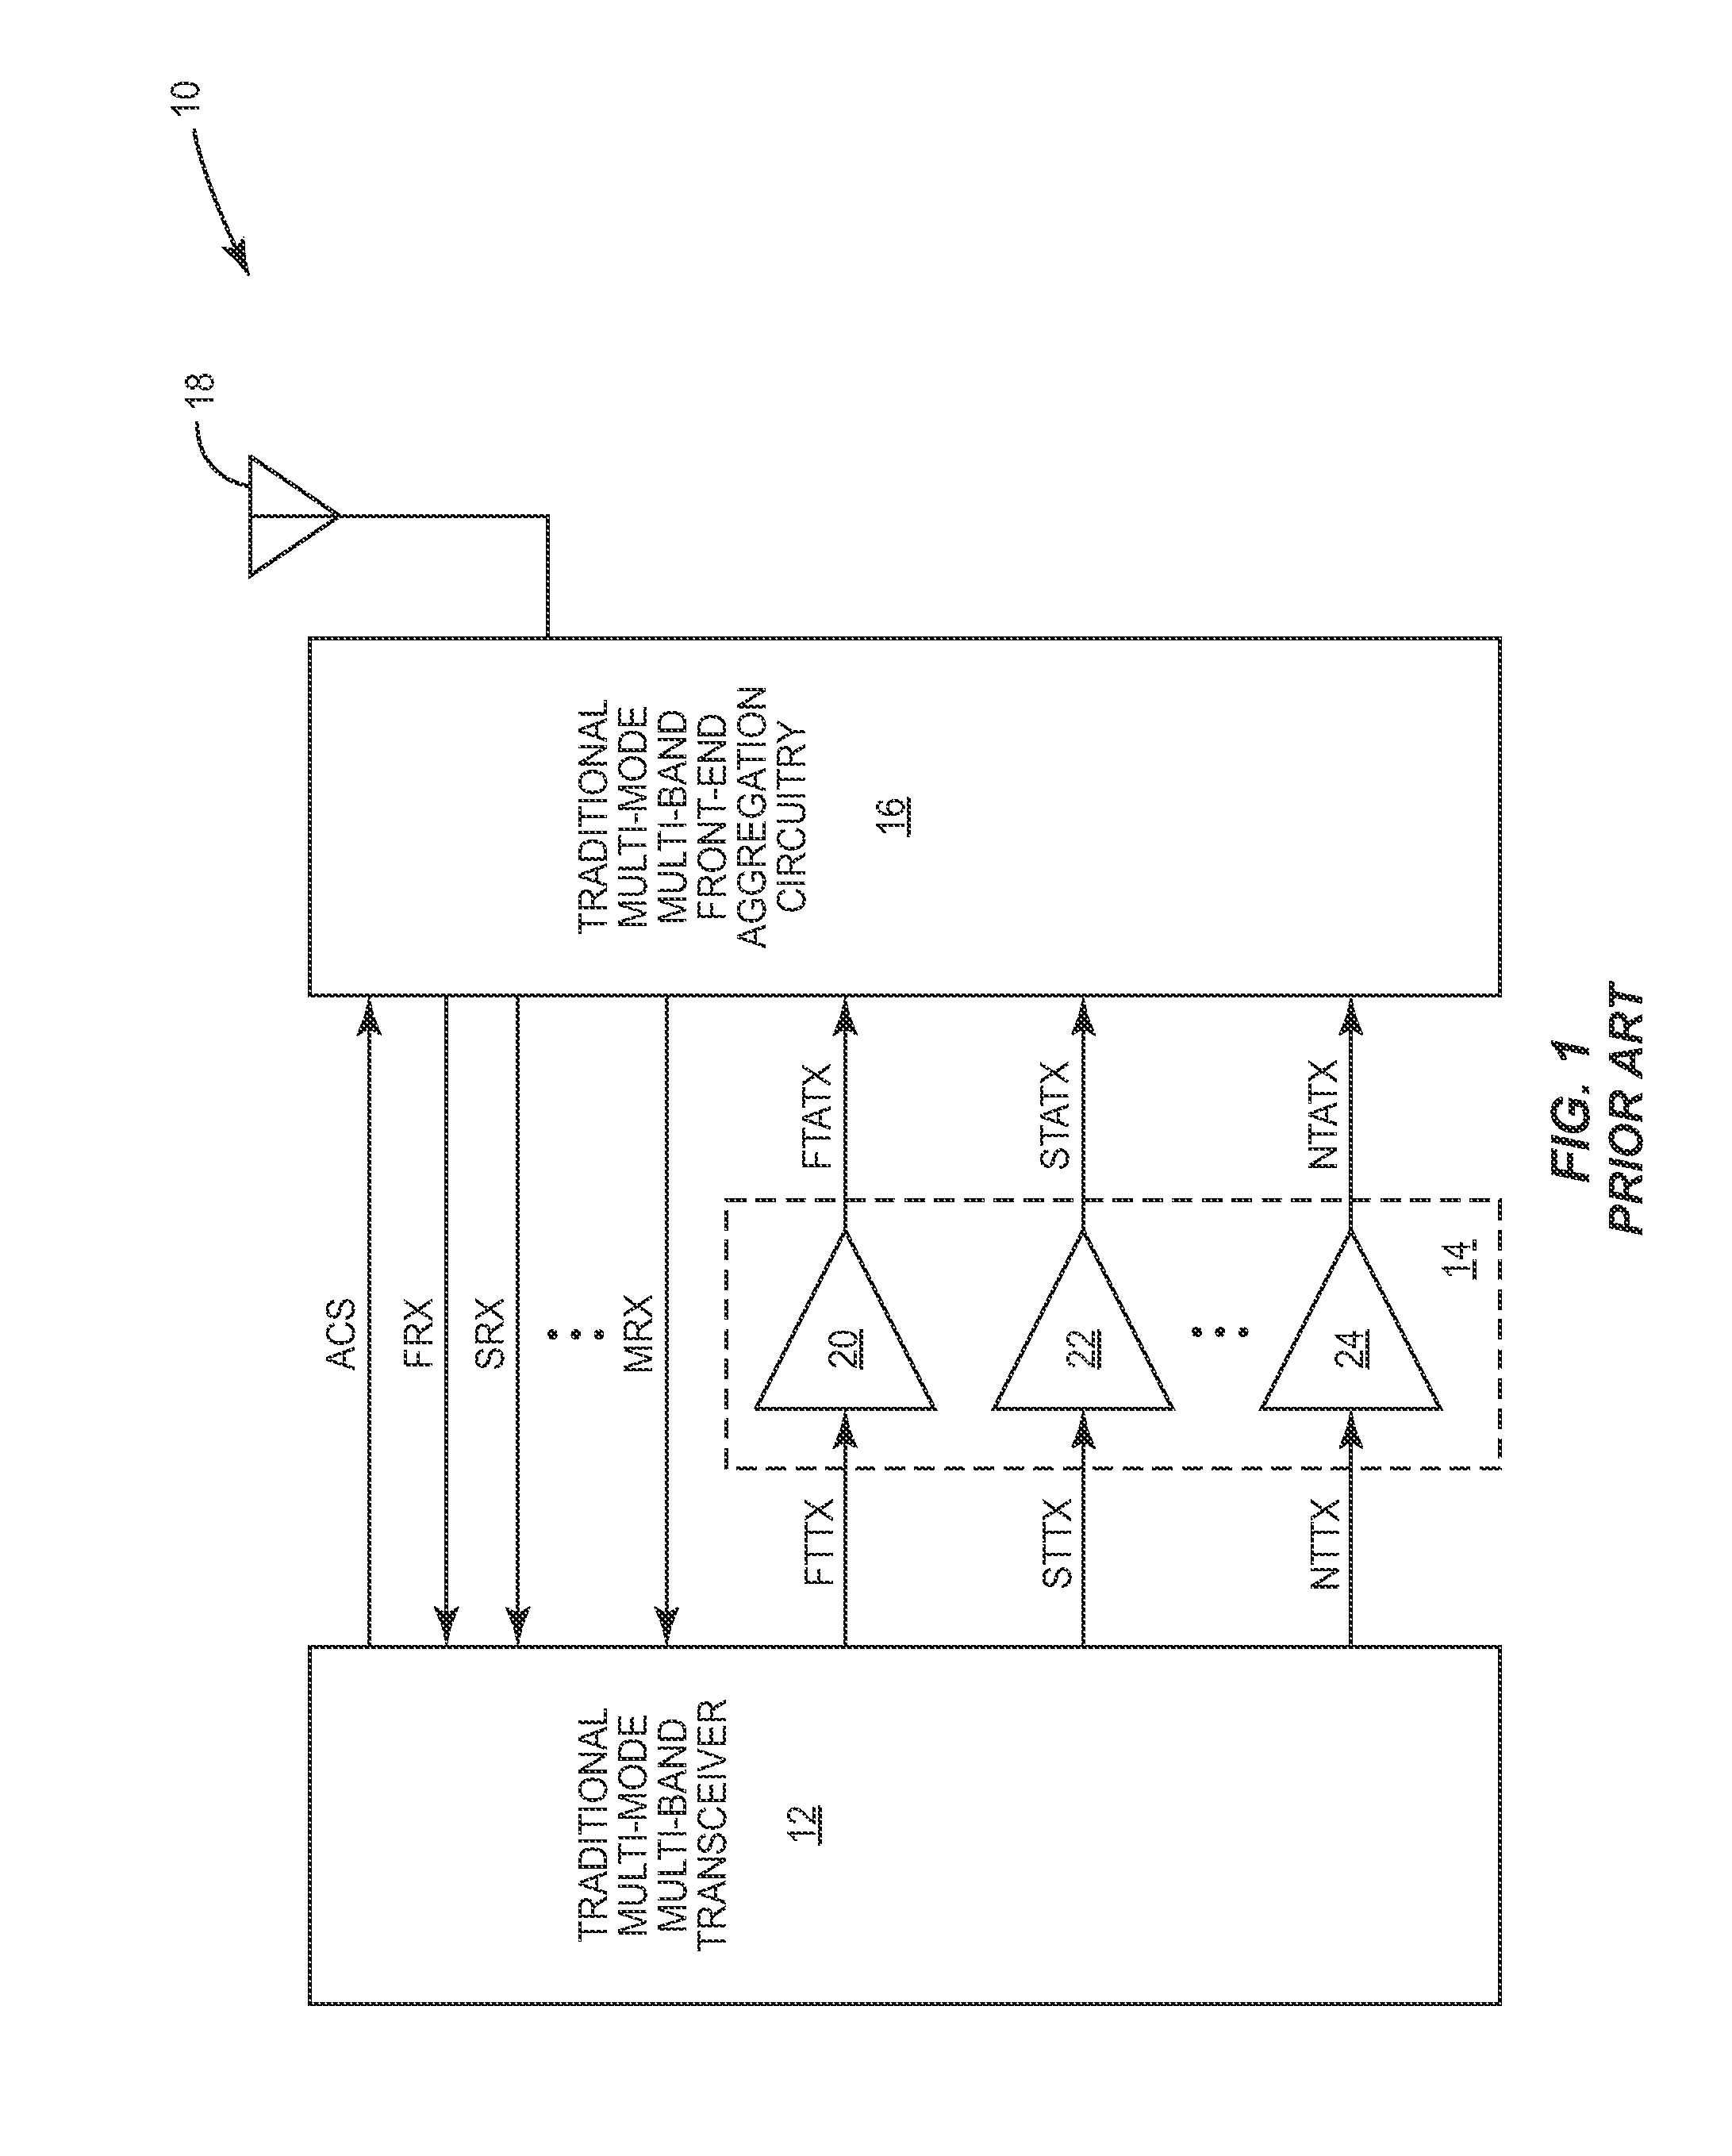 Envelope power supply calibration of a multi-mode radio frequency power amplifier